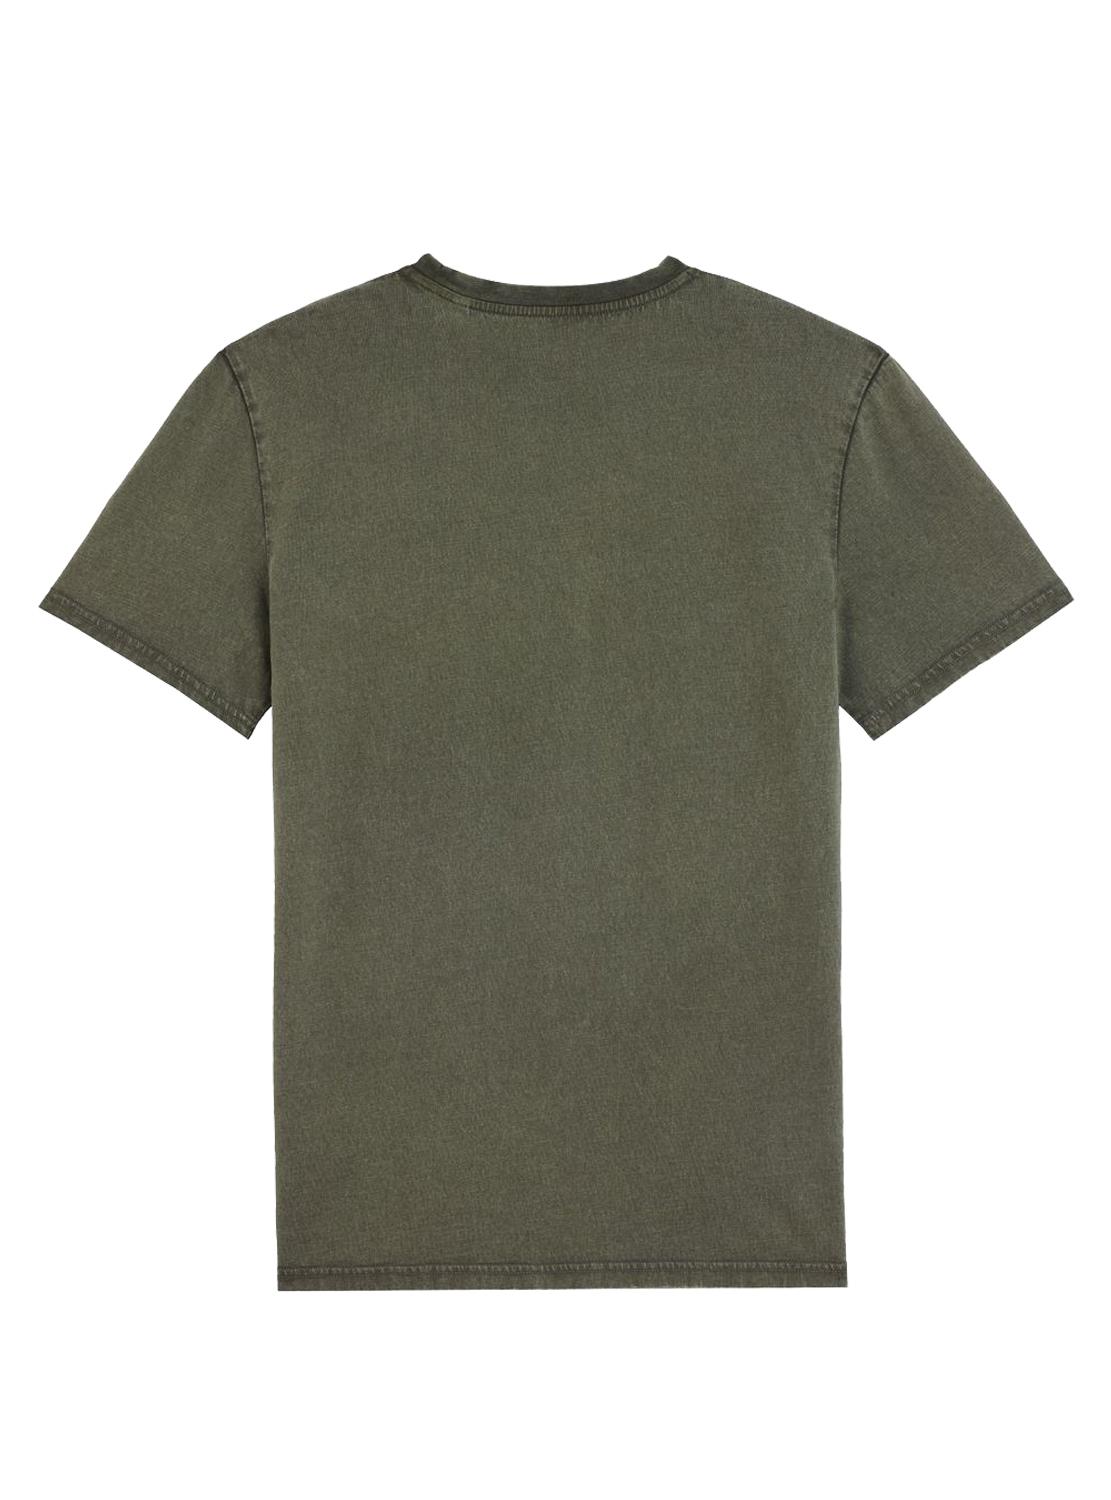 T-Shirt Klout Basic Dyed Verde Cotone Bio